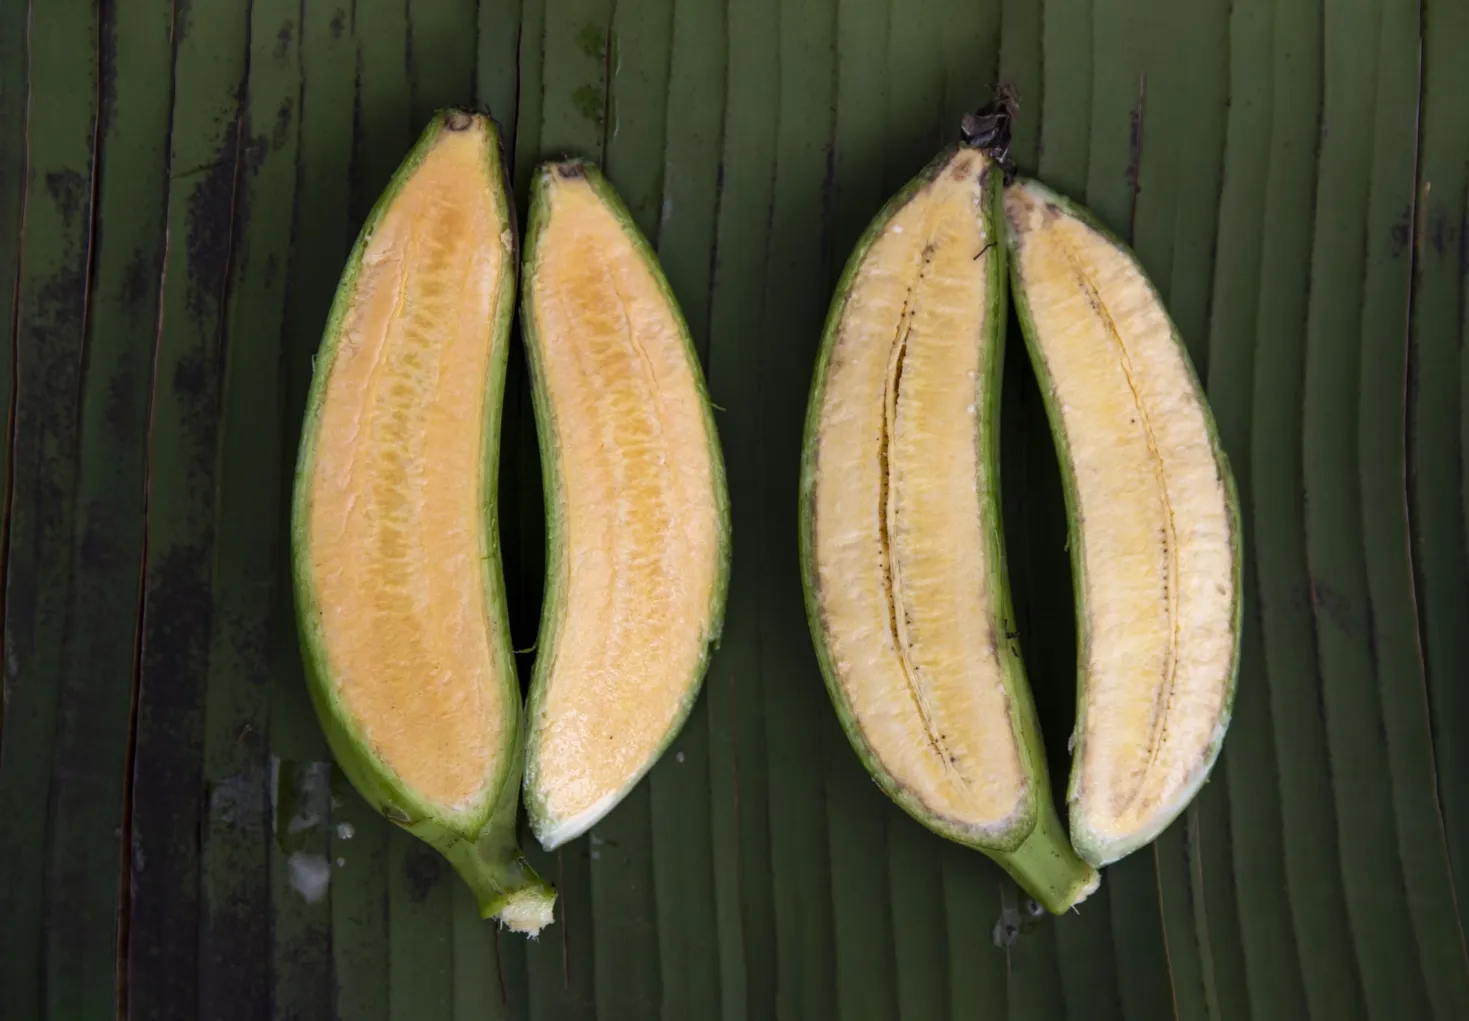 The super banana on the left is modified to contain additional vitamin A